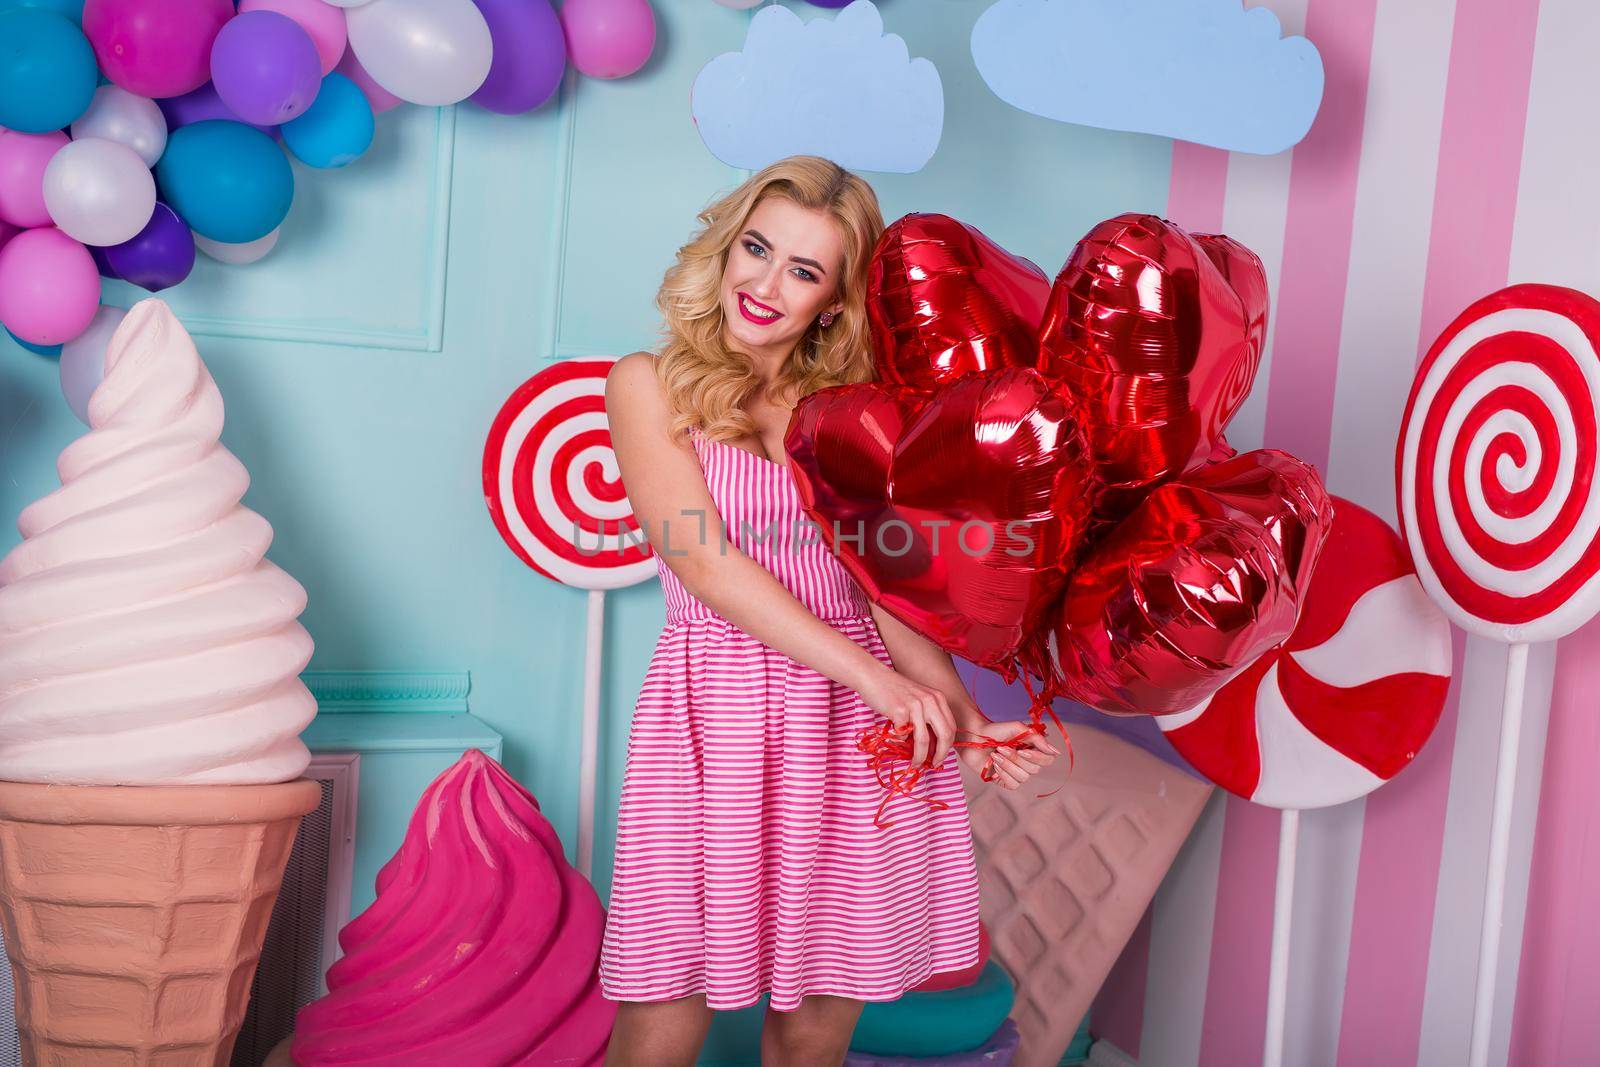 Fashion portrait of young woman in pink dress with an air balloons, candy on a colorful background.